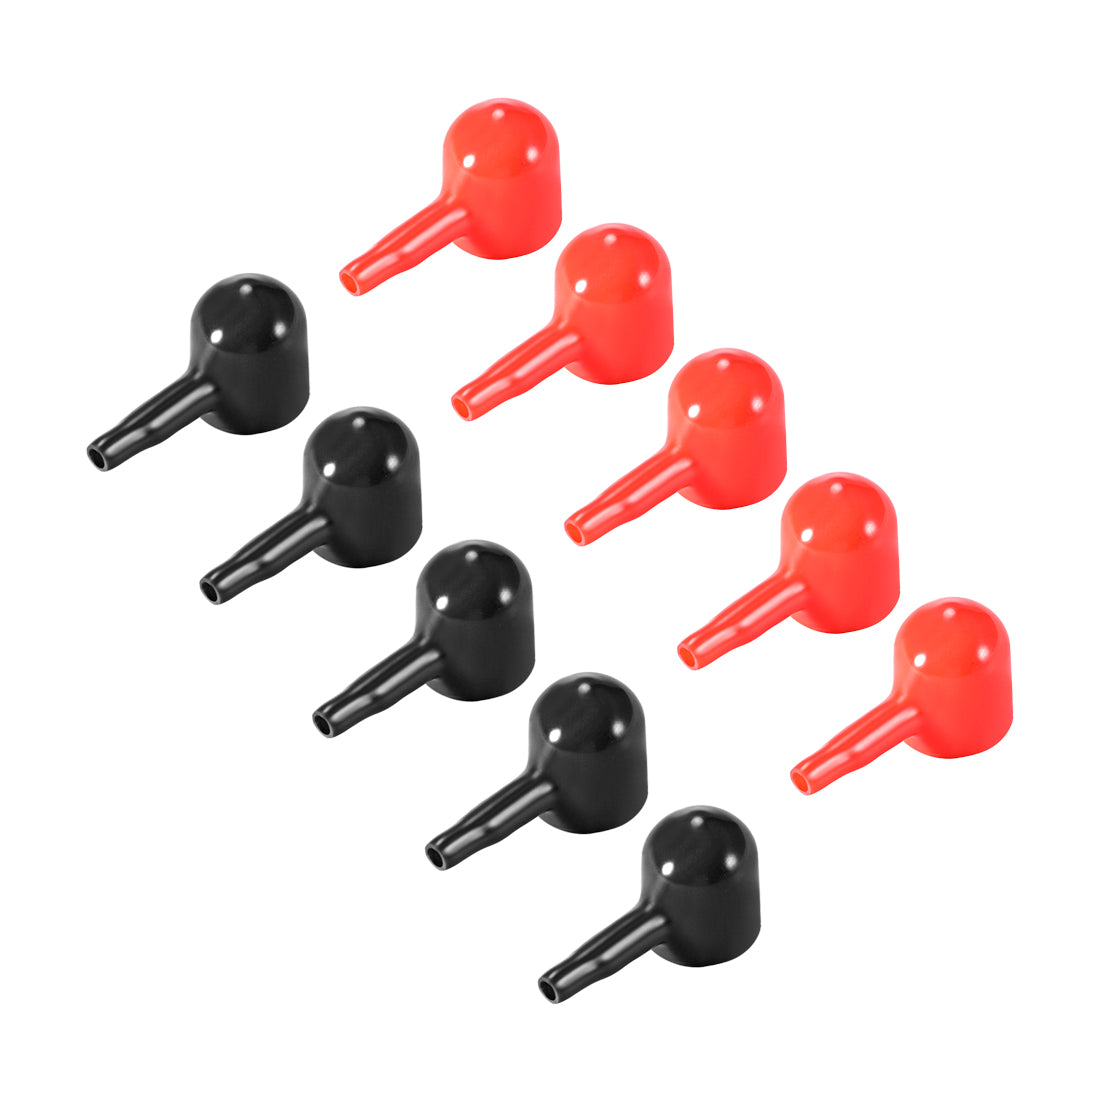 uxcell Uxcell Battery Terminal Insulating Rubber Protector Covers for 12mm Terminal 3mm Cable Red Black 5 Pairs